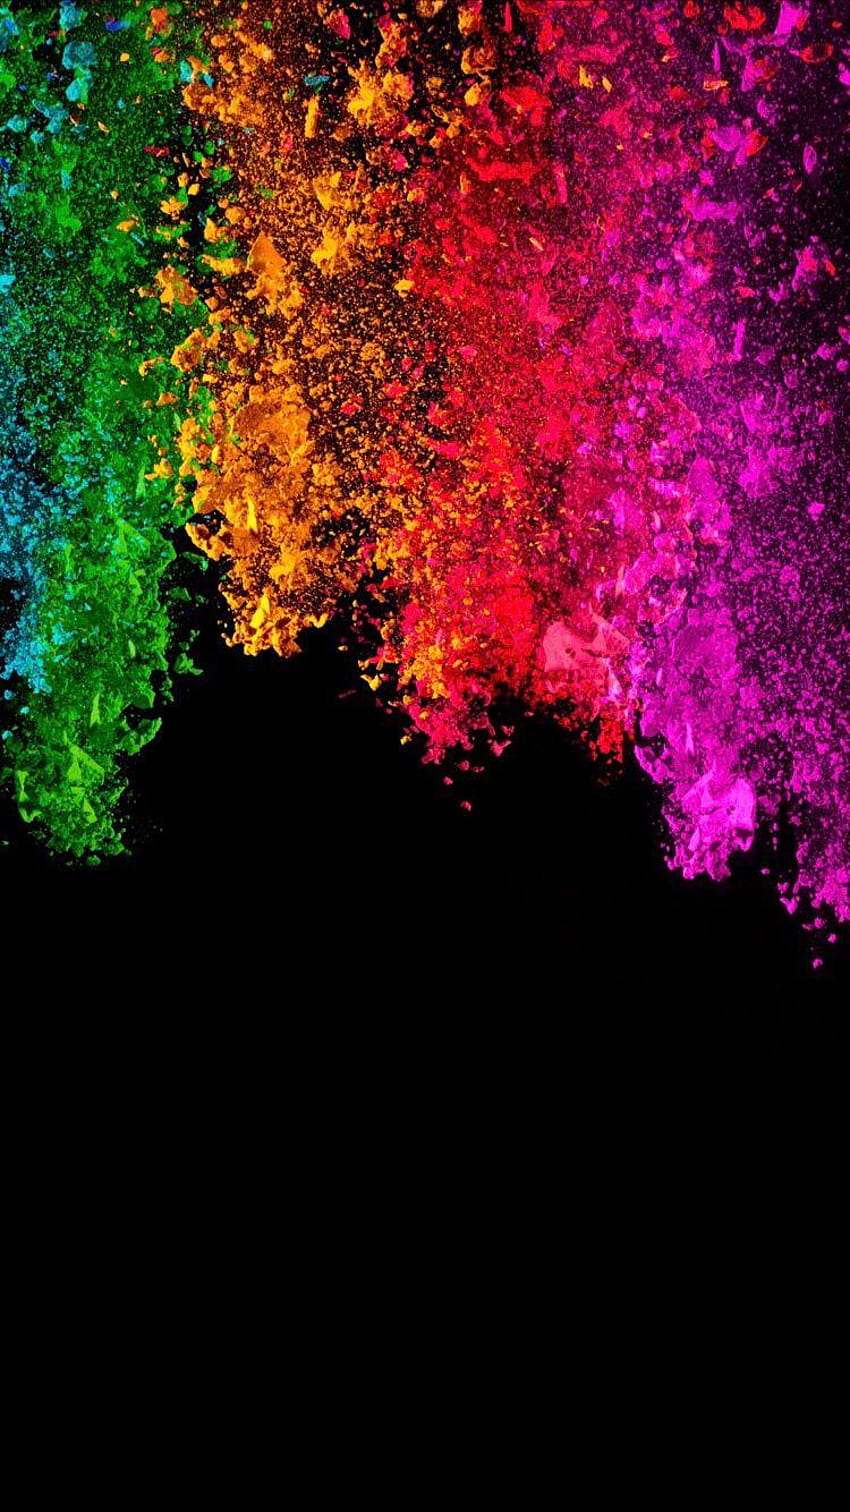 Bright Colors Backgrounds 64 images